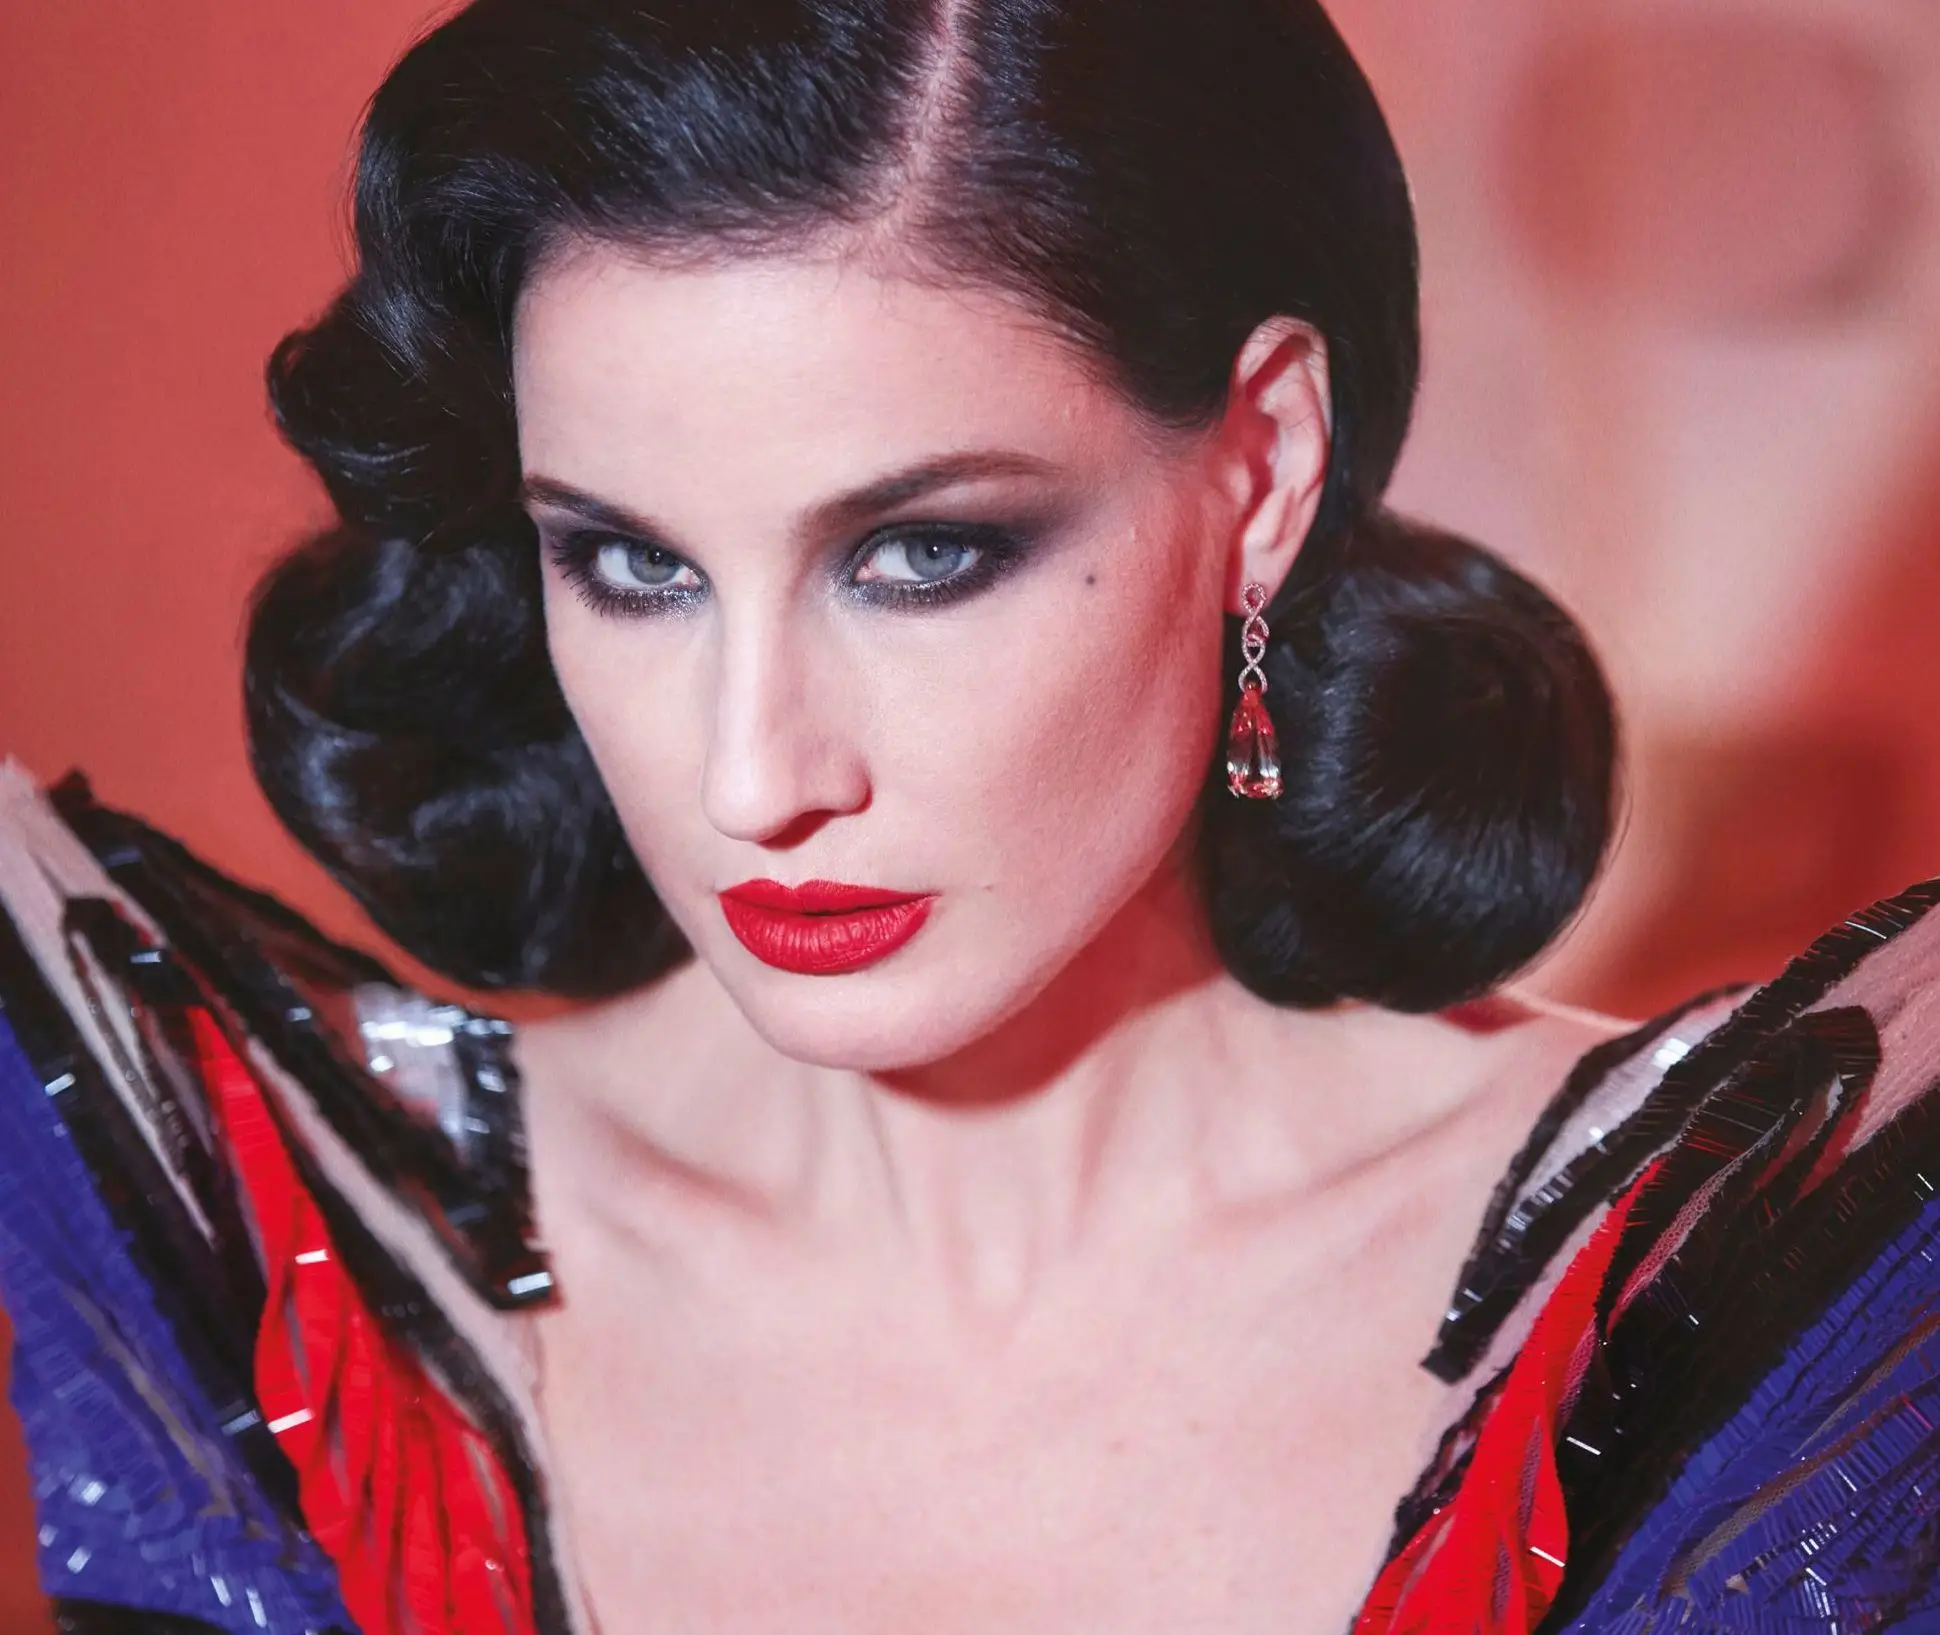 Dita Von Teese by Greg Swales for Narcise Magazine #9 / AvaxHome